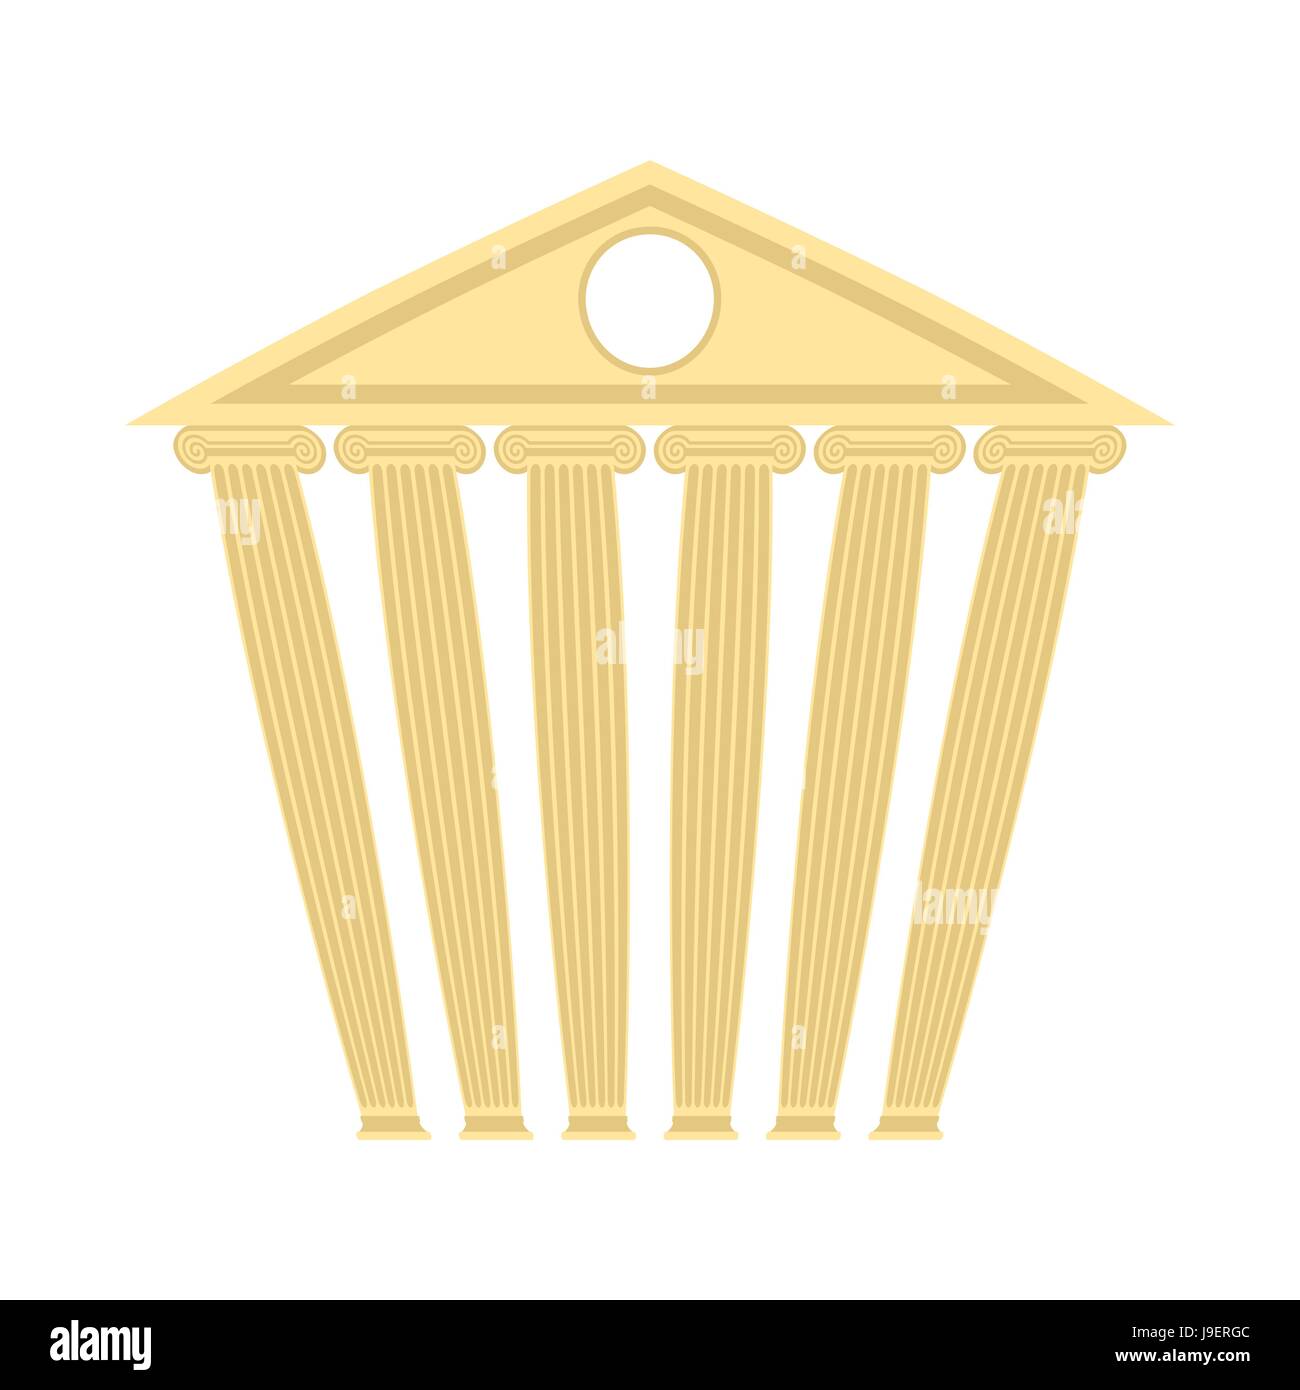 Ancient antique building. Building with columns. Vector illustration. Stock Vector